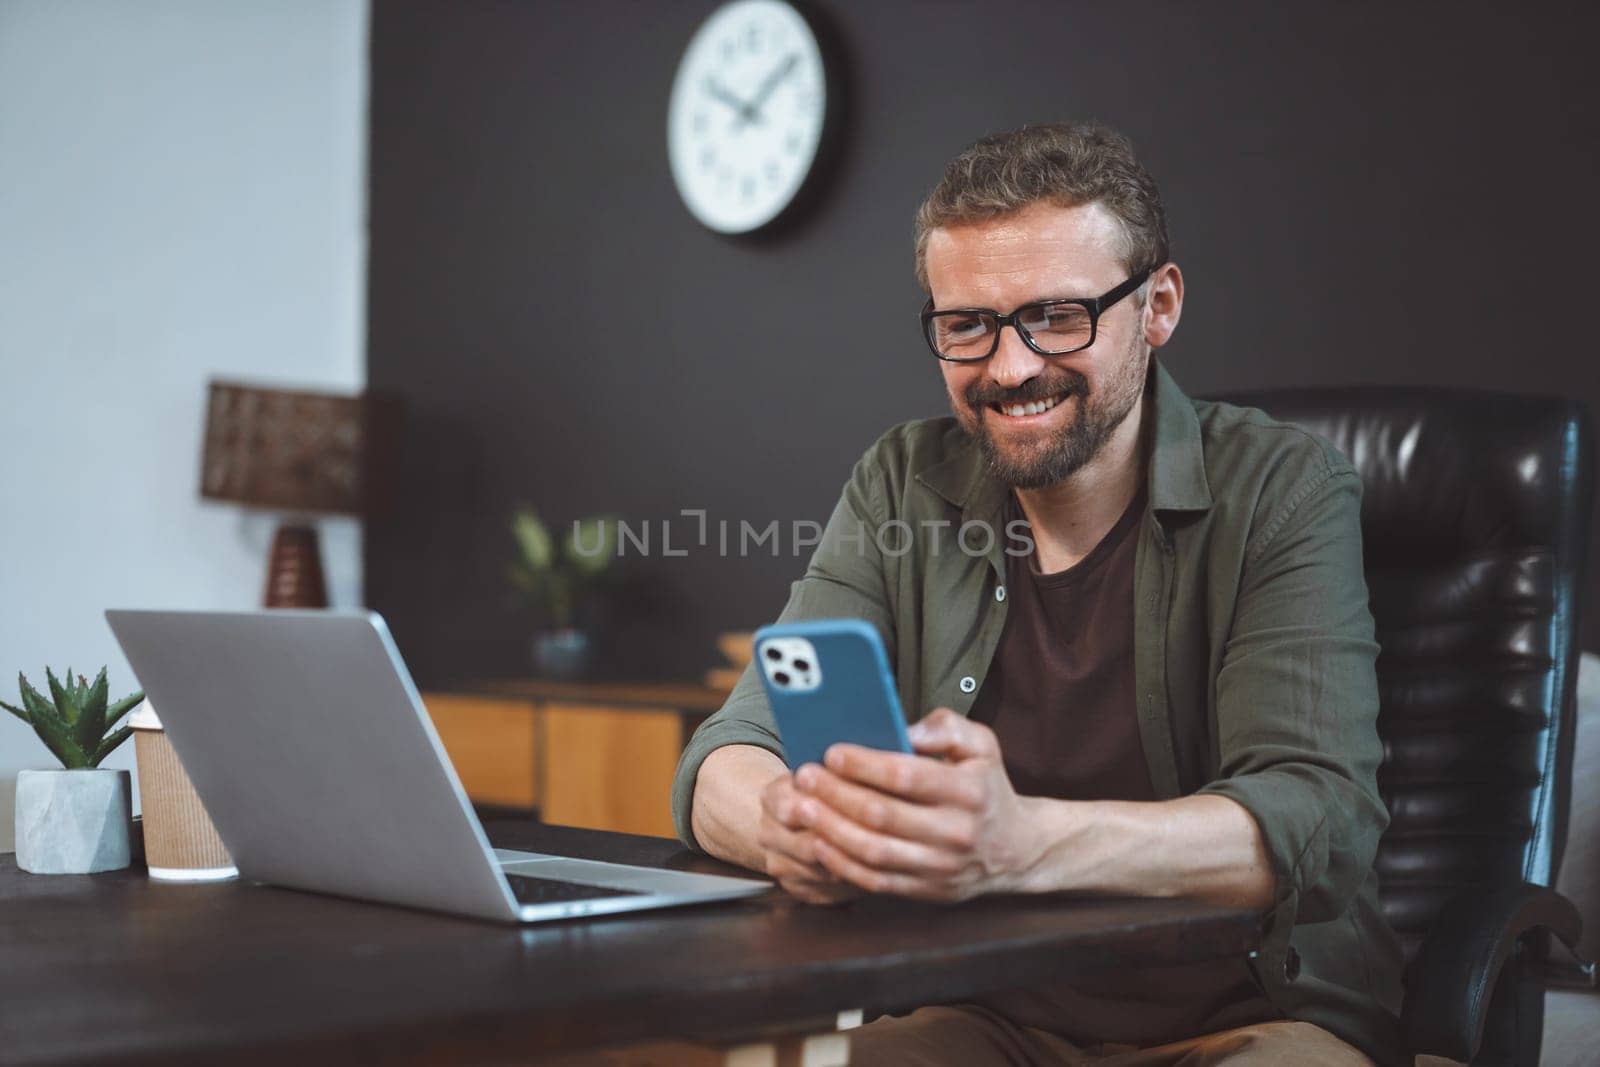 Smiling and happy mid-aged man engages in online activities while sitting at home on desk near laptop. Man is depicted multitasking, either sending text message or spending time online through phone. by LipikStockMedia